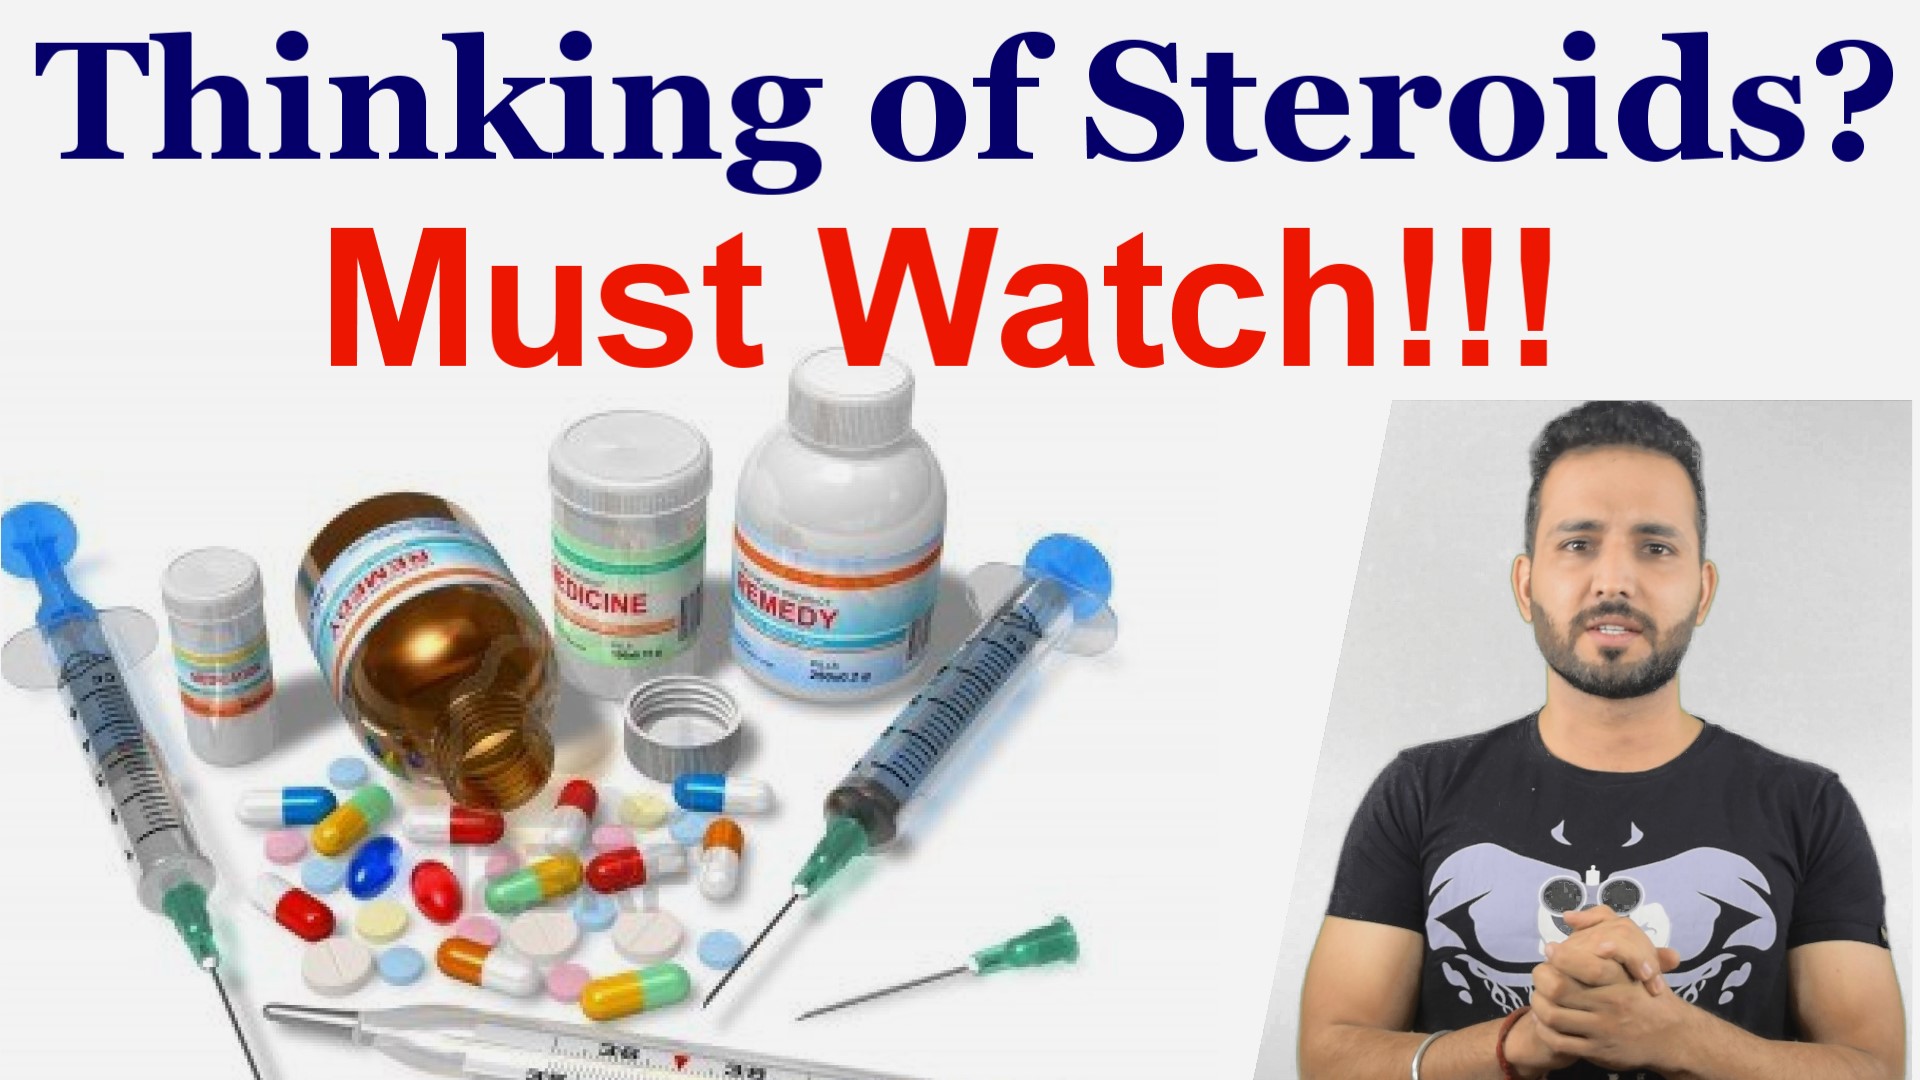 How to take Steroids? | Performance Enhancing Drugs